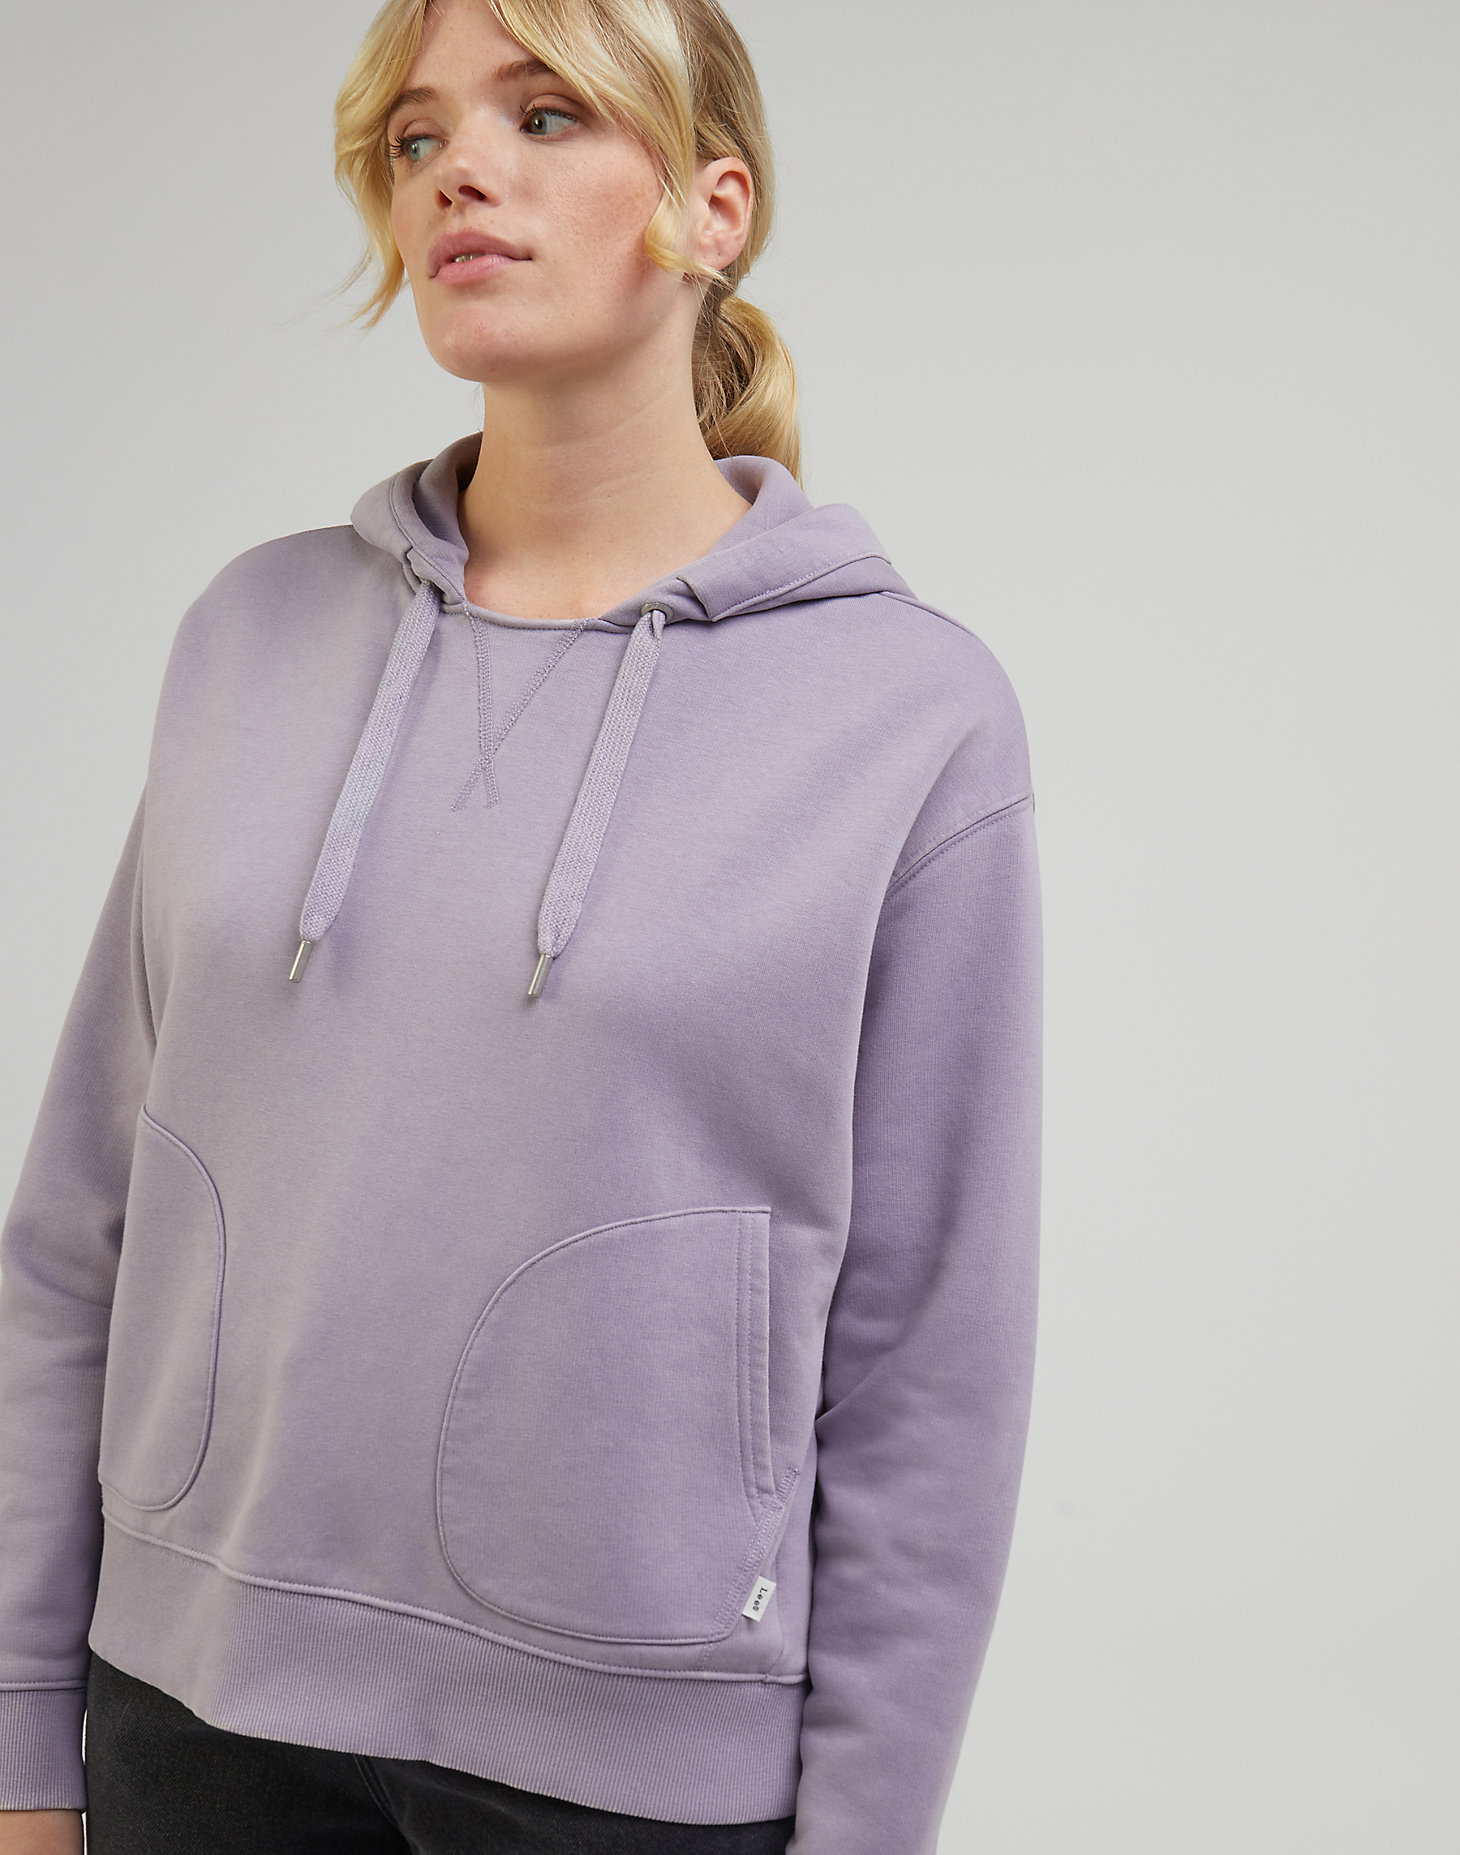 Relaxed Hoodie in Jazzy Purple alternative view 4